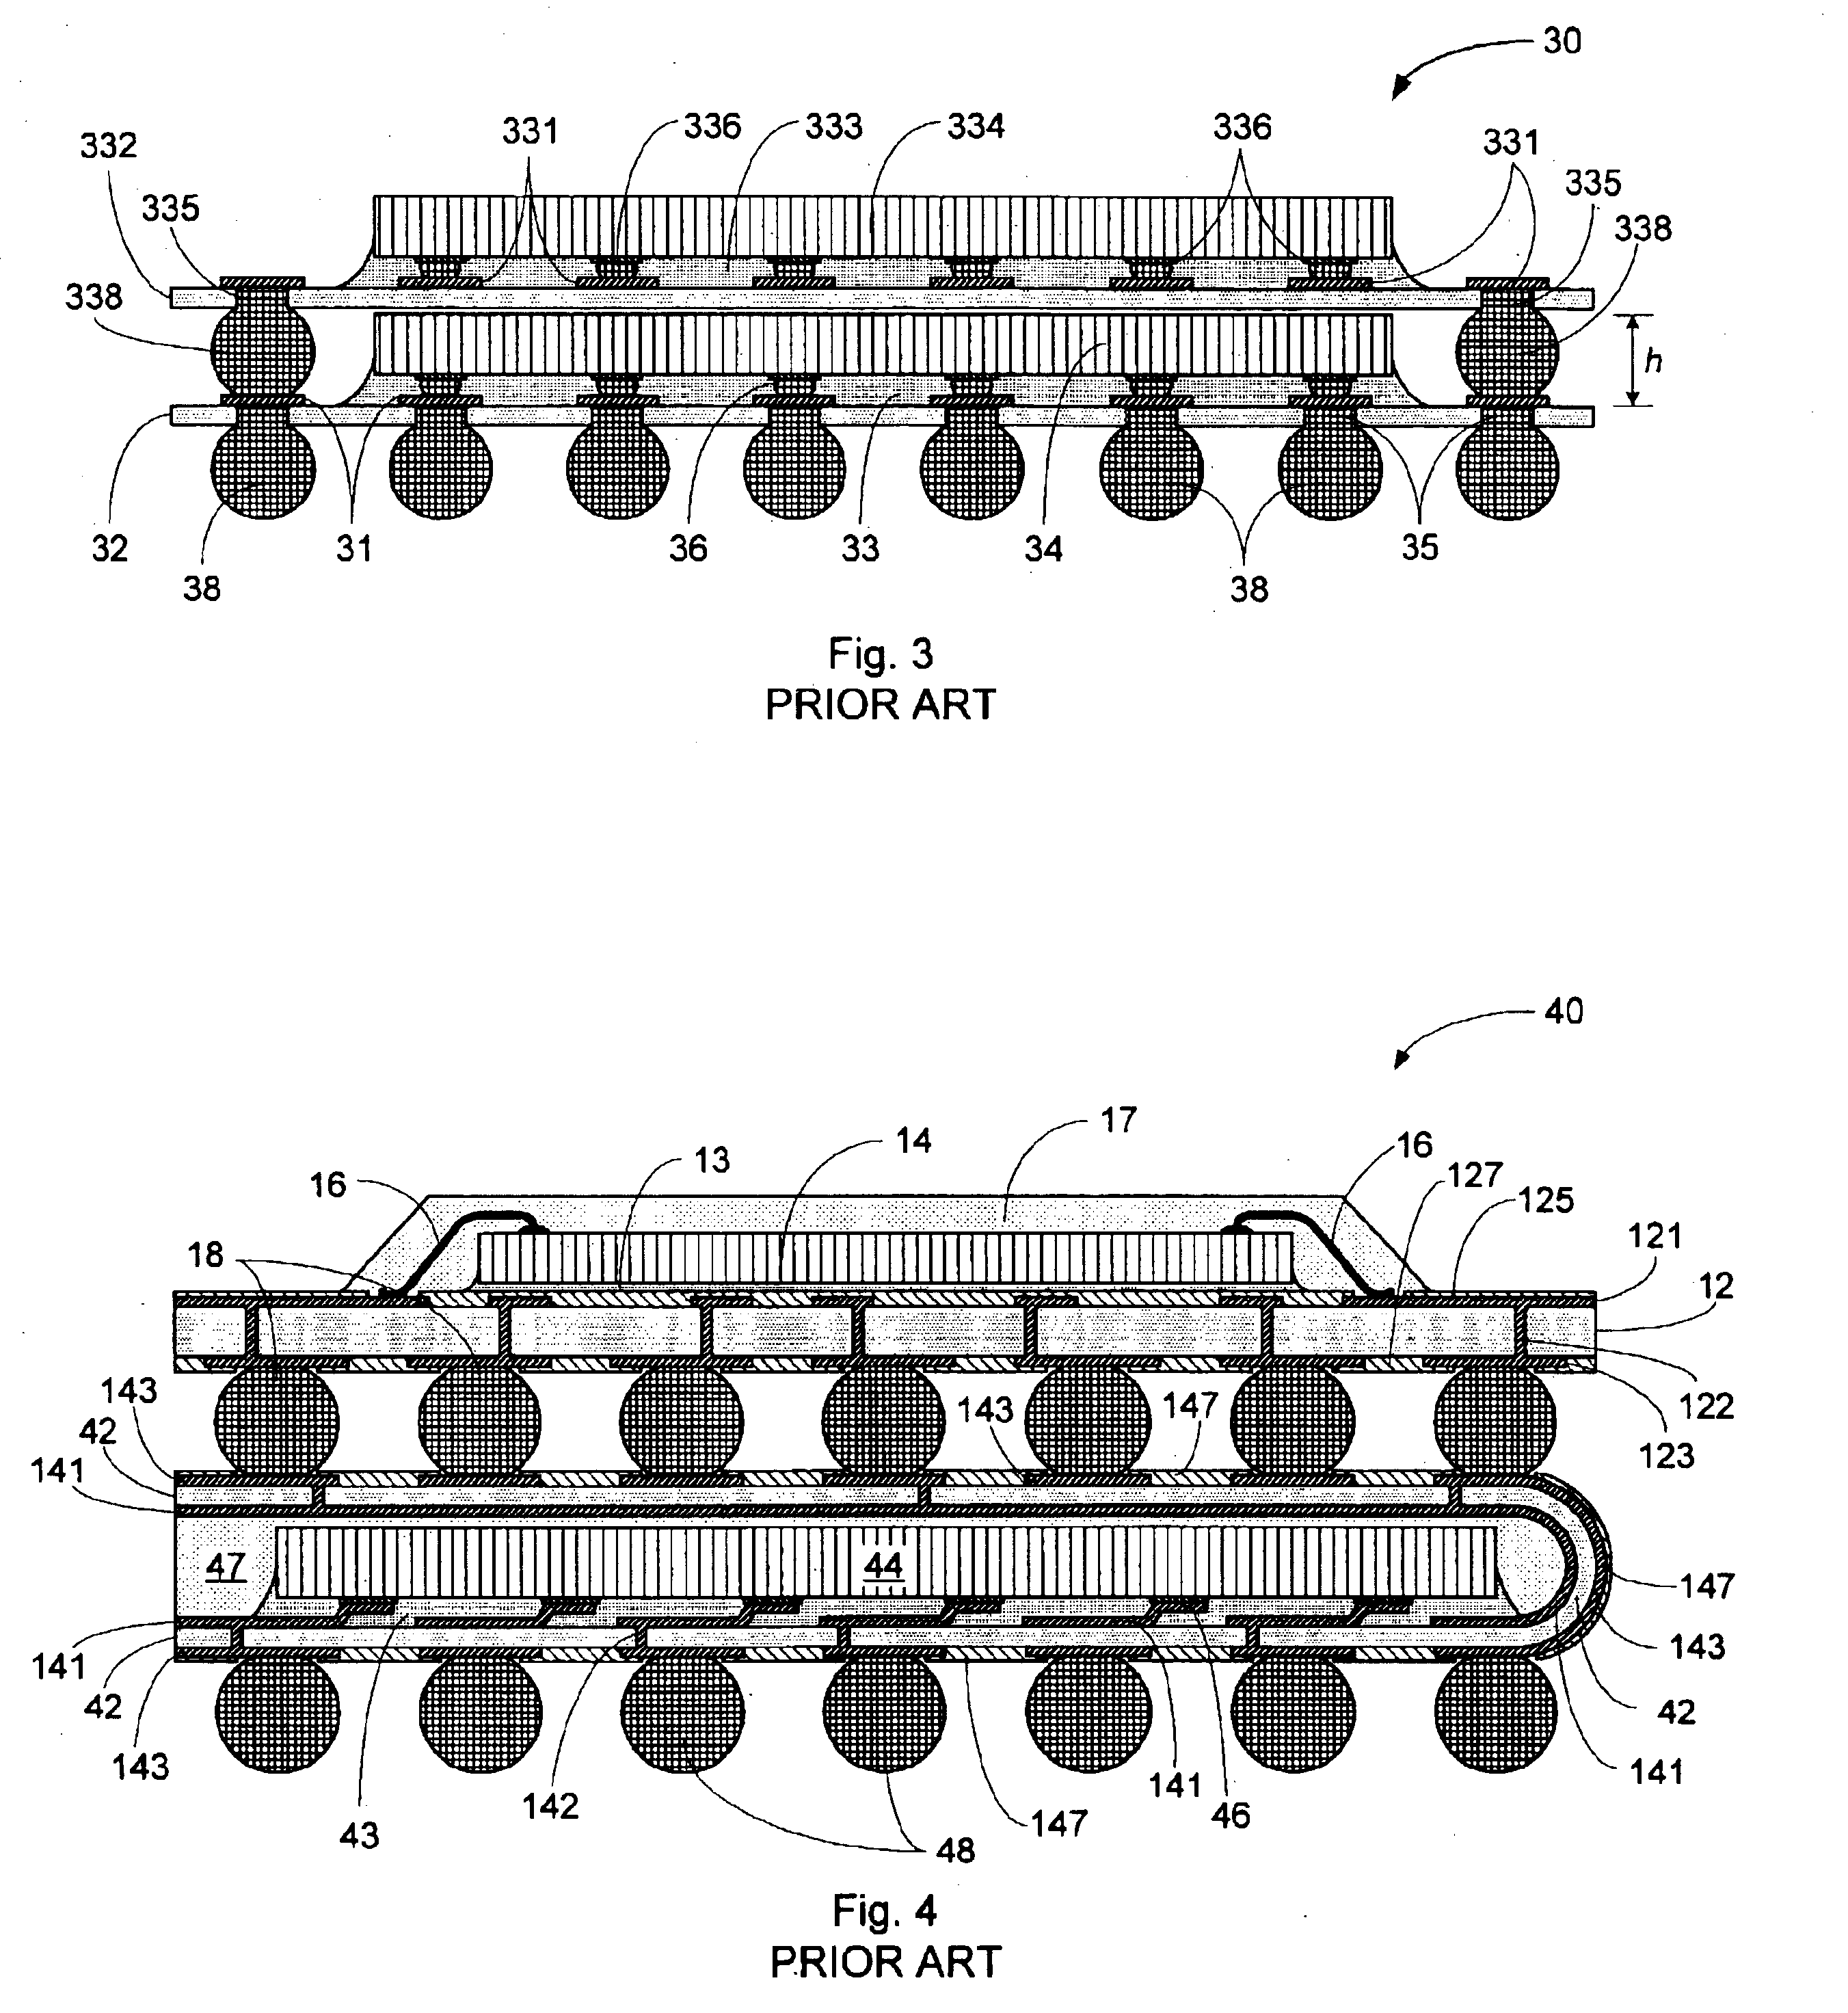 Semiconductor multi-package module having wire bond interconnect between stacked packages and having electrical shield